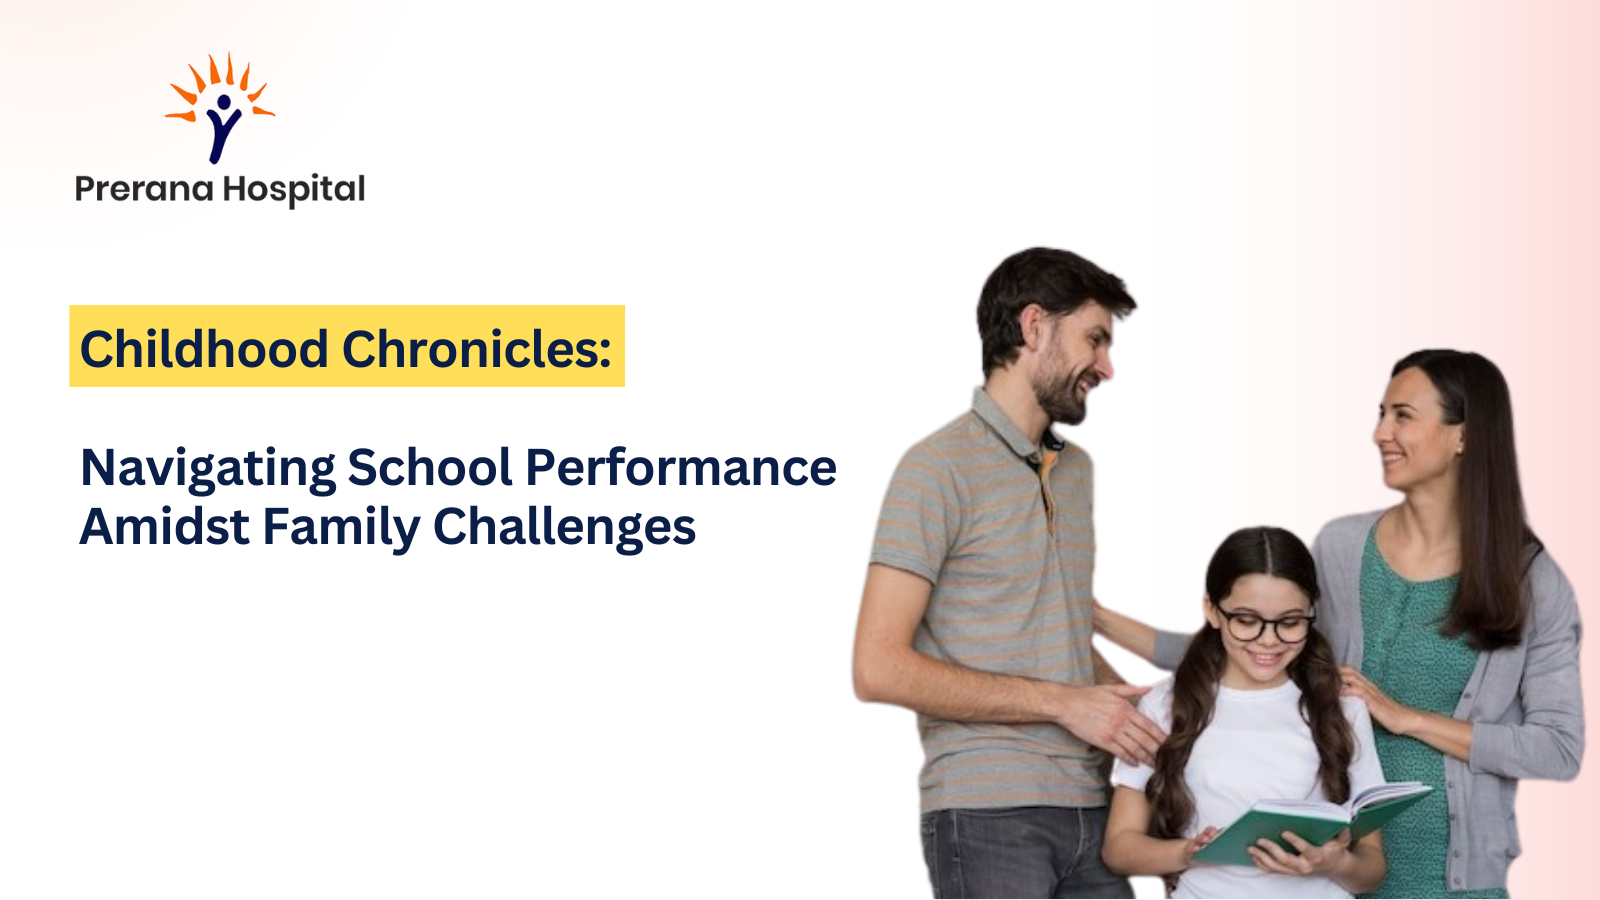 Childhood Chronicles: Navigating School Performance Amidst Family Challenges